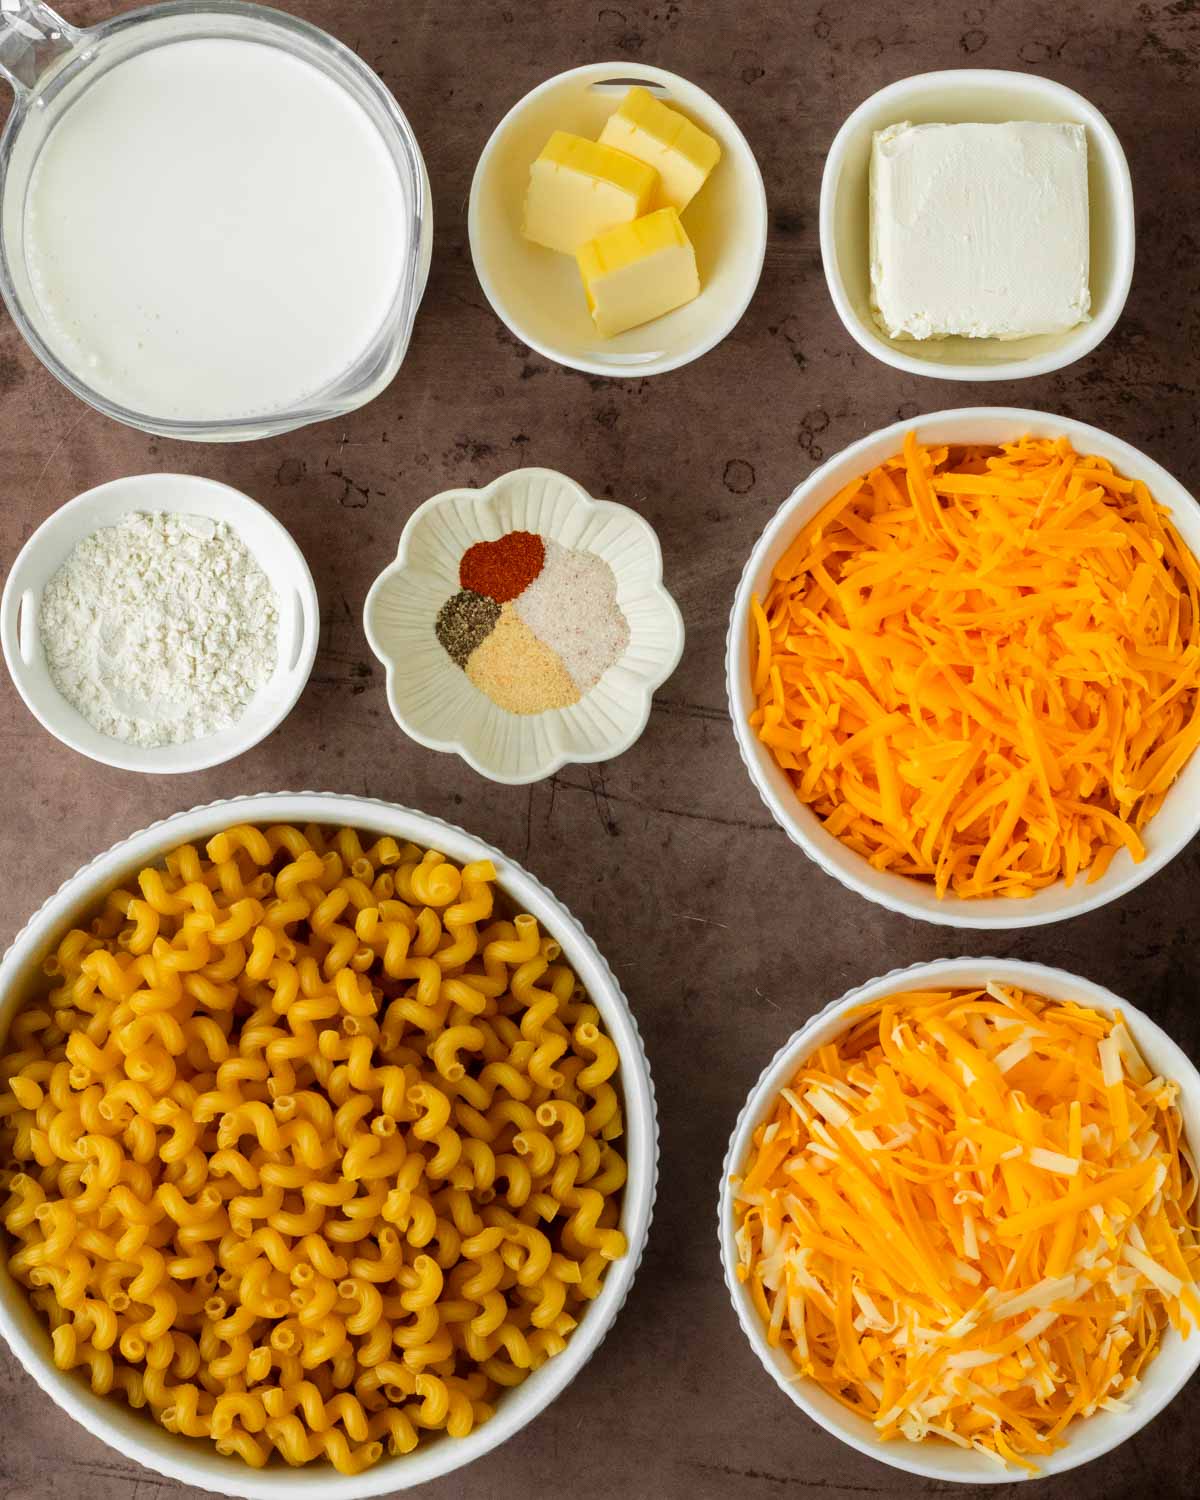 Macaroni and Cheese Ingredients